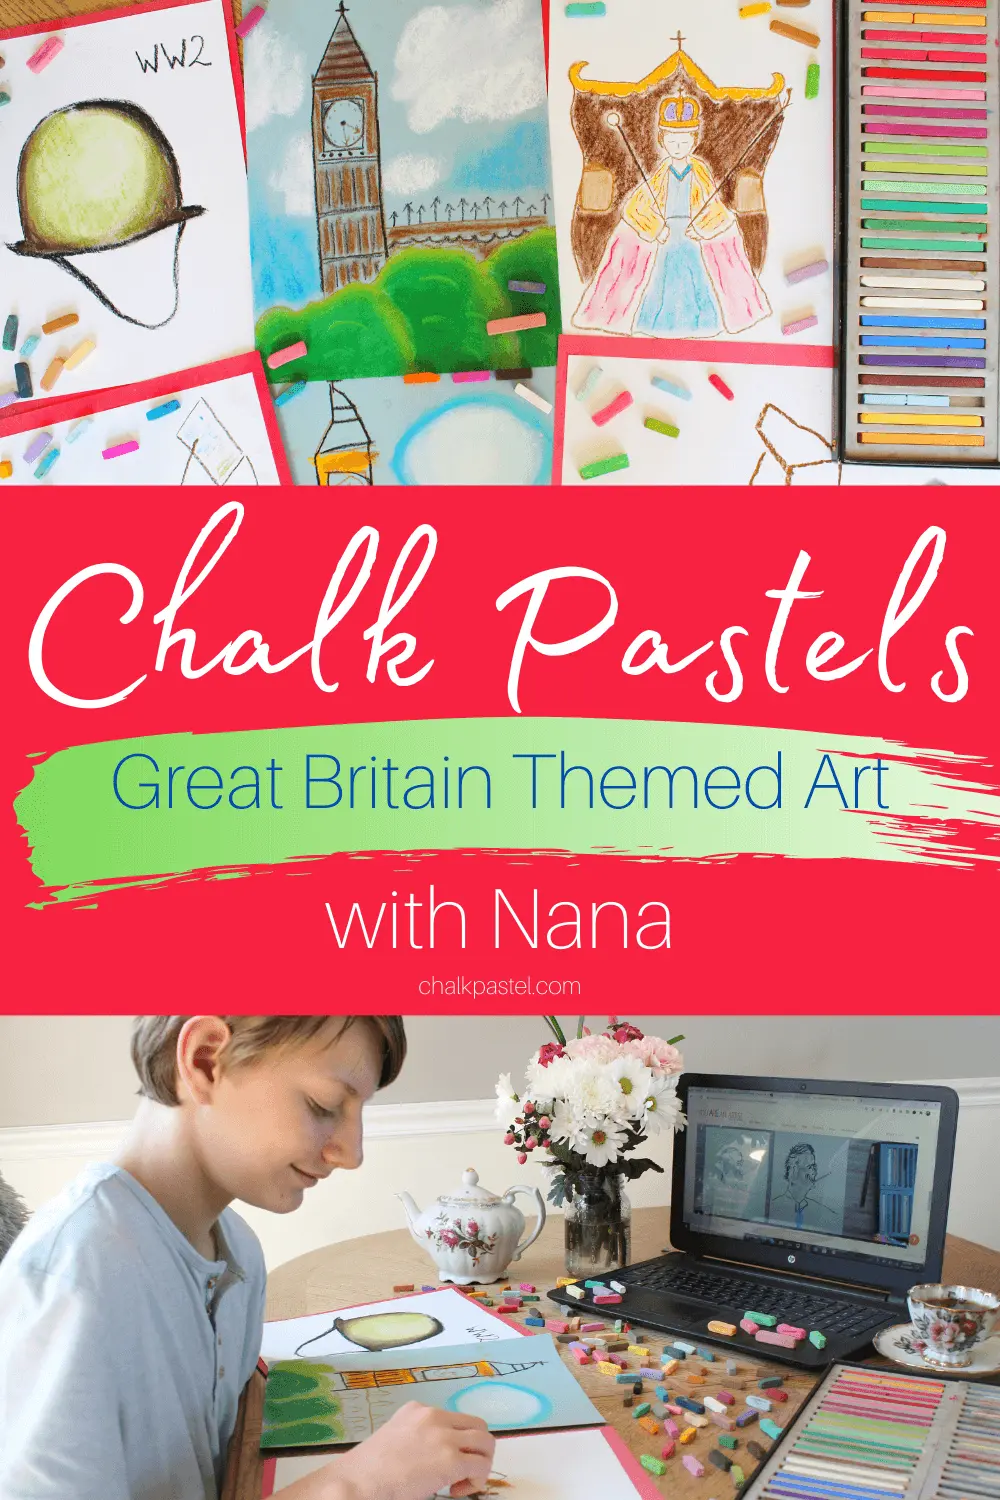 Chalk Pastels Great Britain Themed Art with Nana